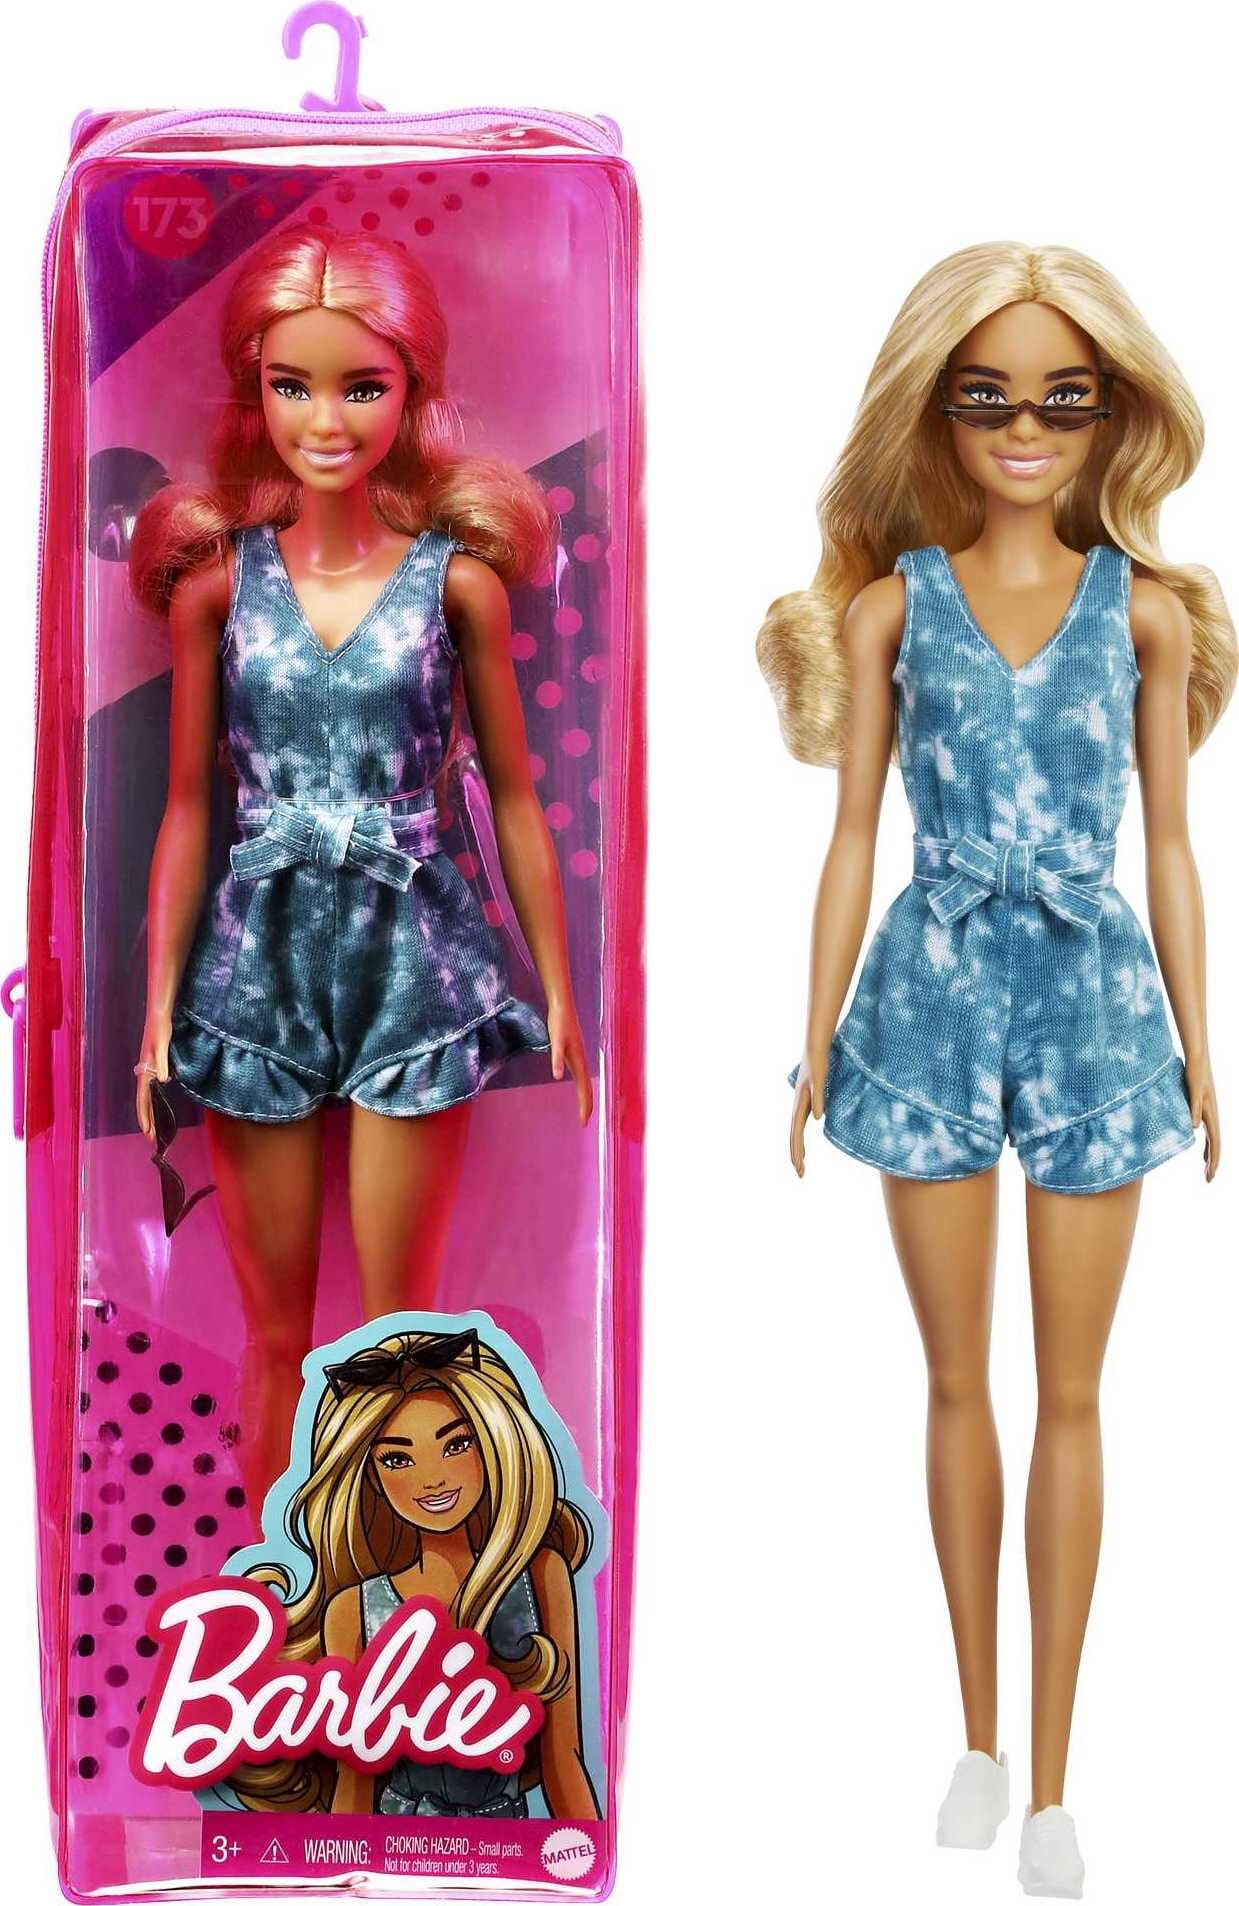 Barbie Fashionista 173 Doll, Blonde Hair with Sunglasses